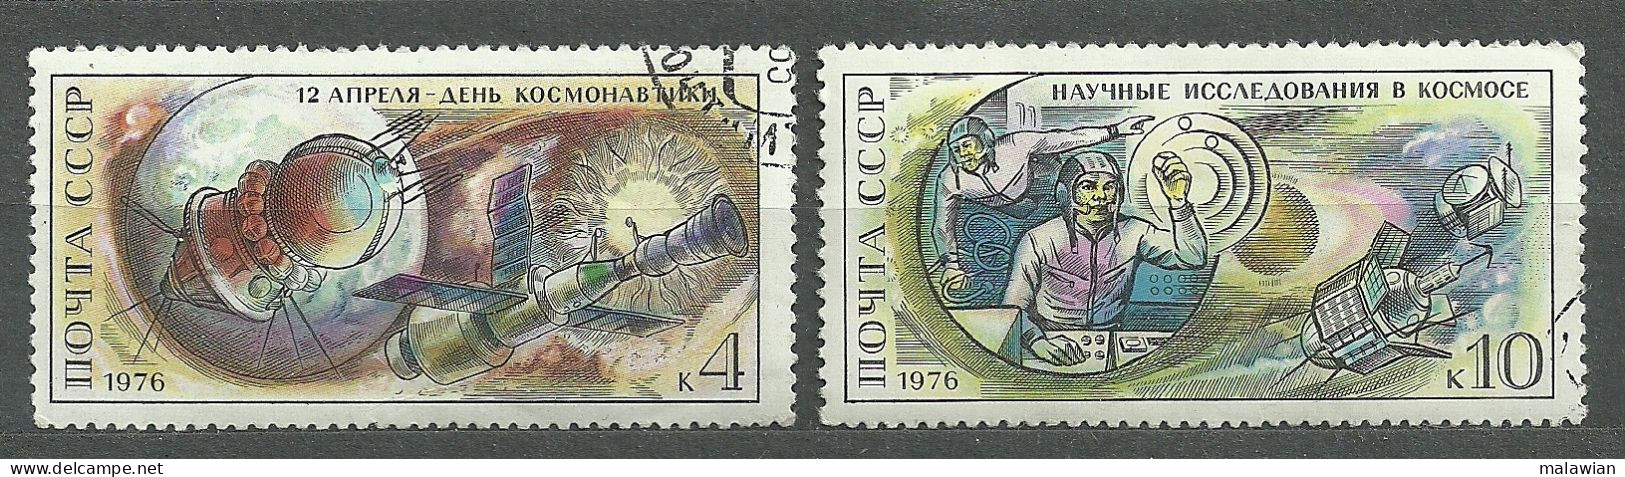 Russia - Soviet Union, 1976 (#4255,57a), 15th Anniversary Of First Man Space Flight, Cosmos, Kosmos, Cosmo, Astronomy - Russie & URSS